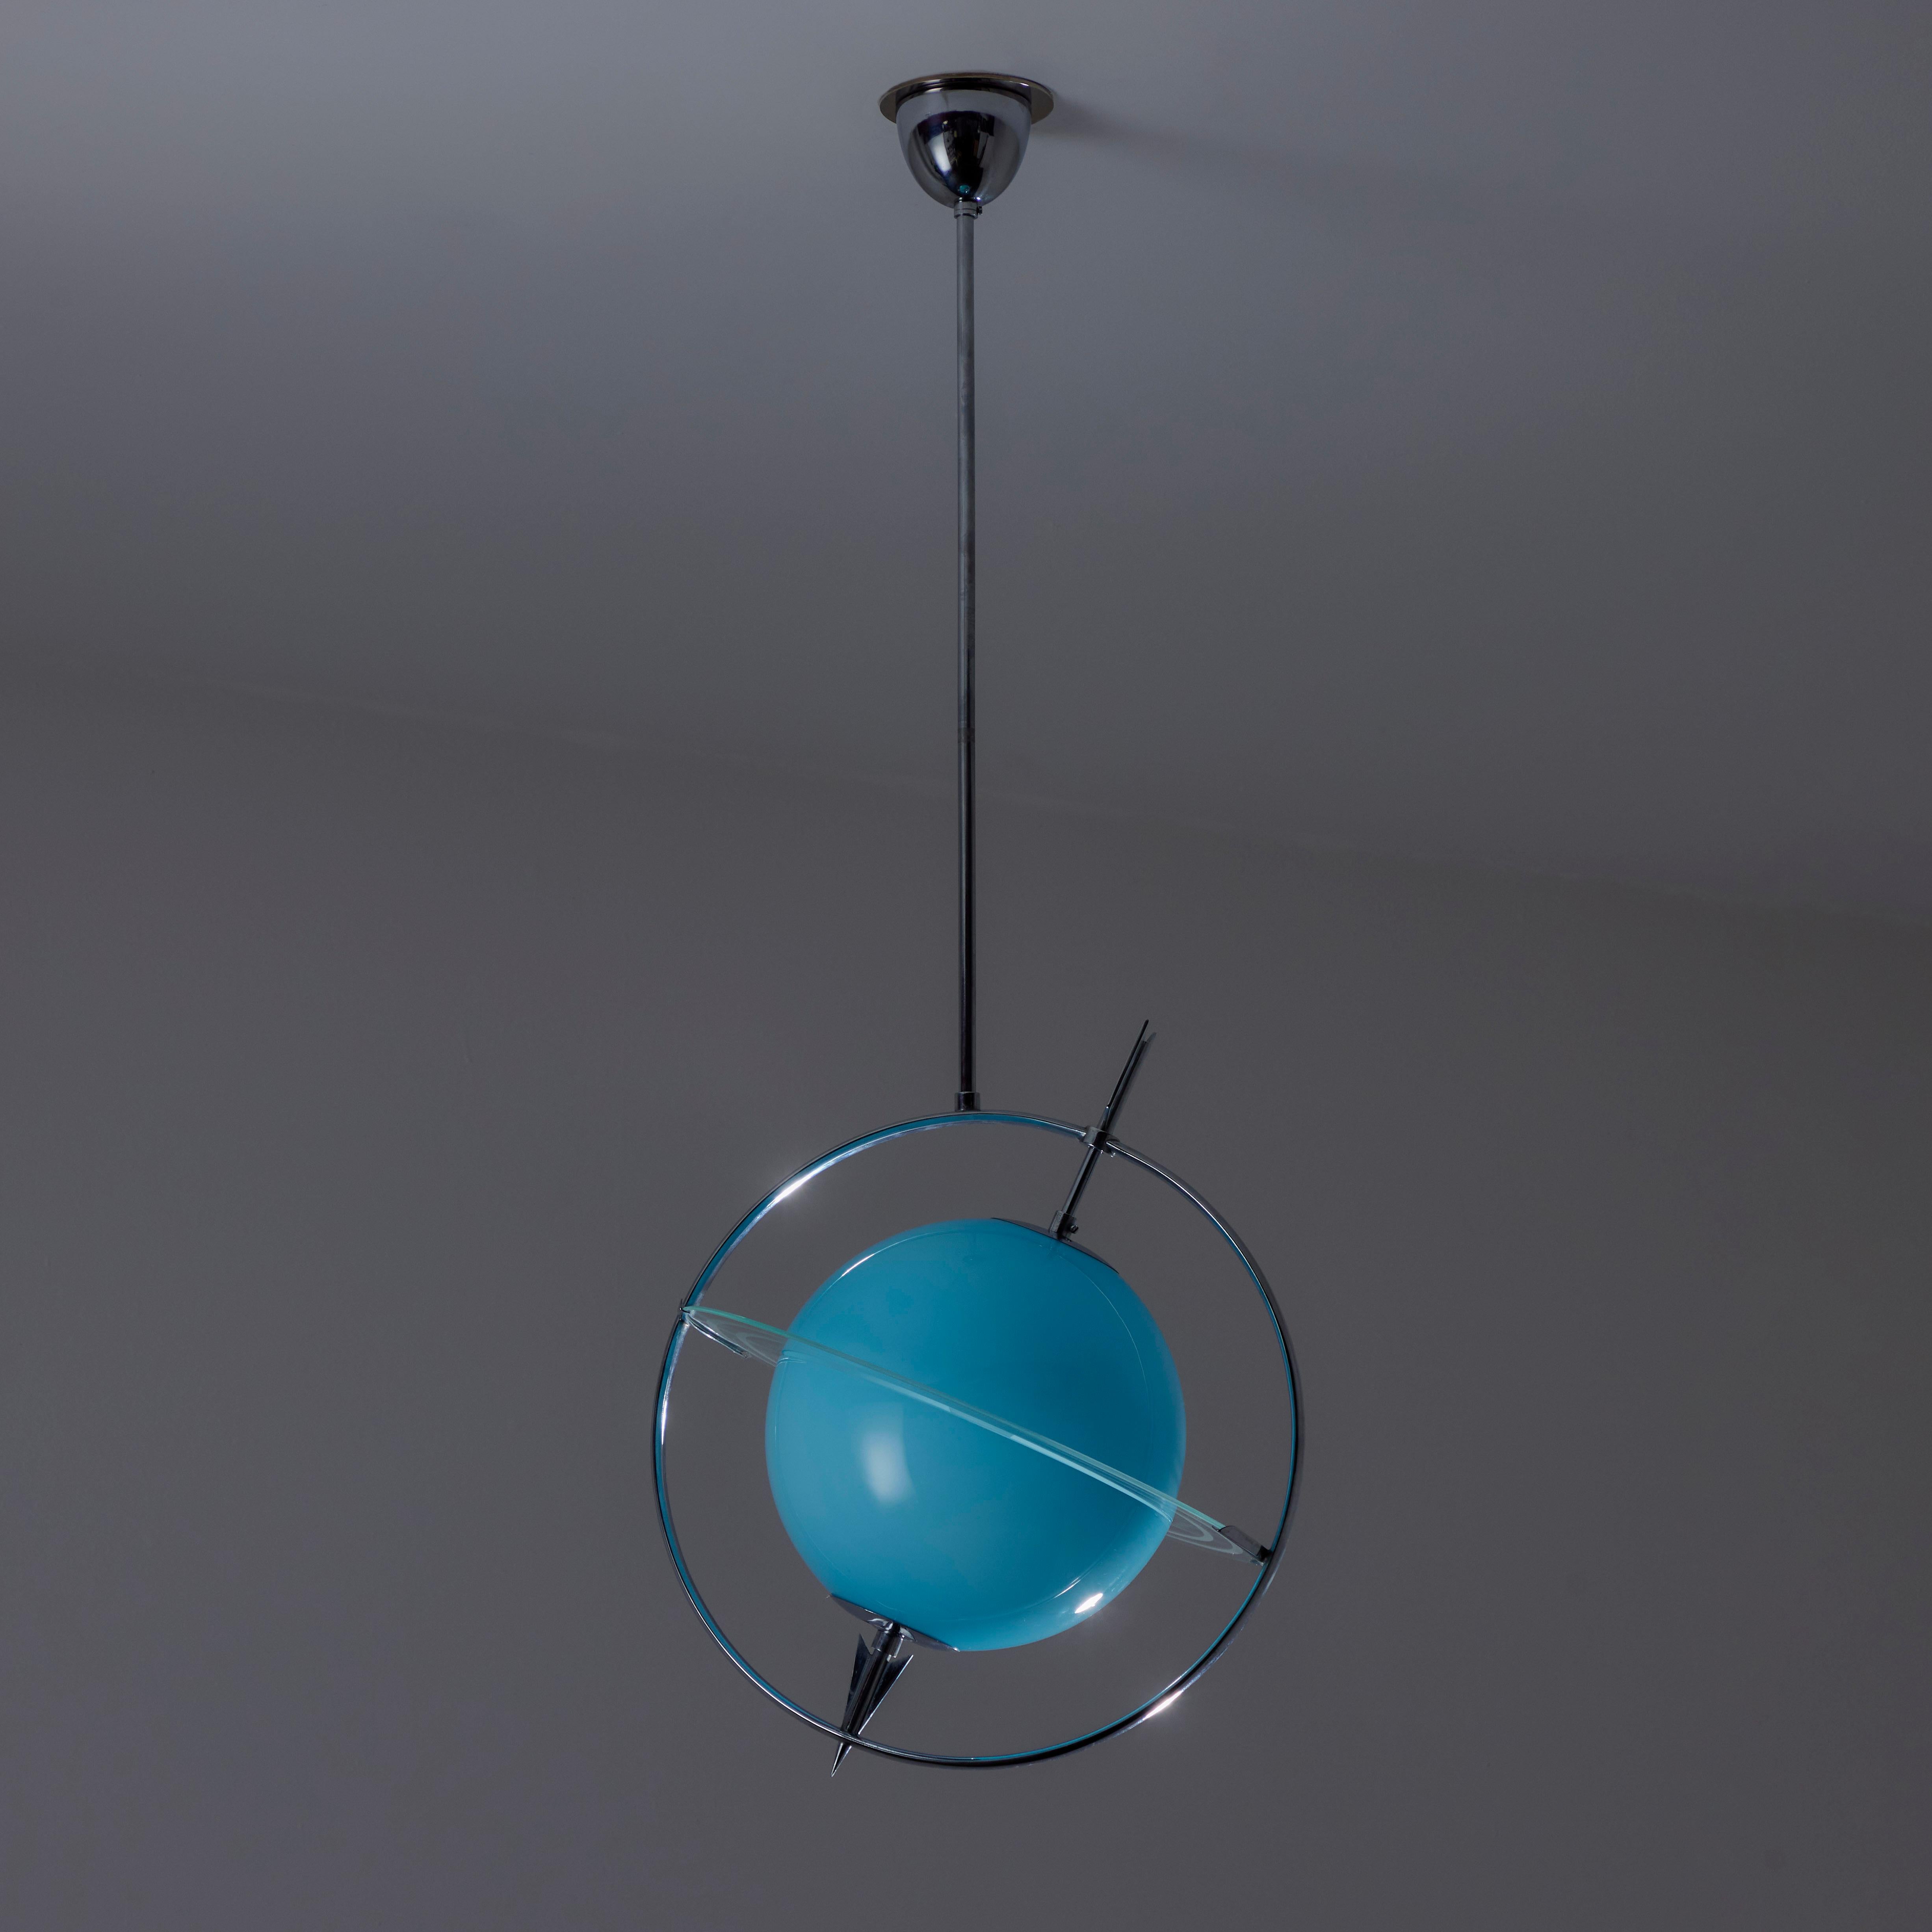 Rare Ceiling Light by Gio Ponti and Pietro Chiesa for Fontana Arte. Designed and manufactured in Italy, circa the 1930s. Unique sculptural 'Saturn' ceiling light, with an illustrative metal frame depicting an arrow piercing a blue glass with a